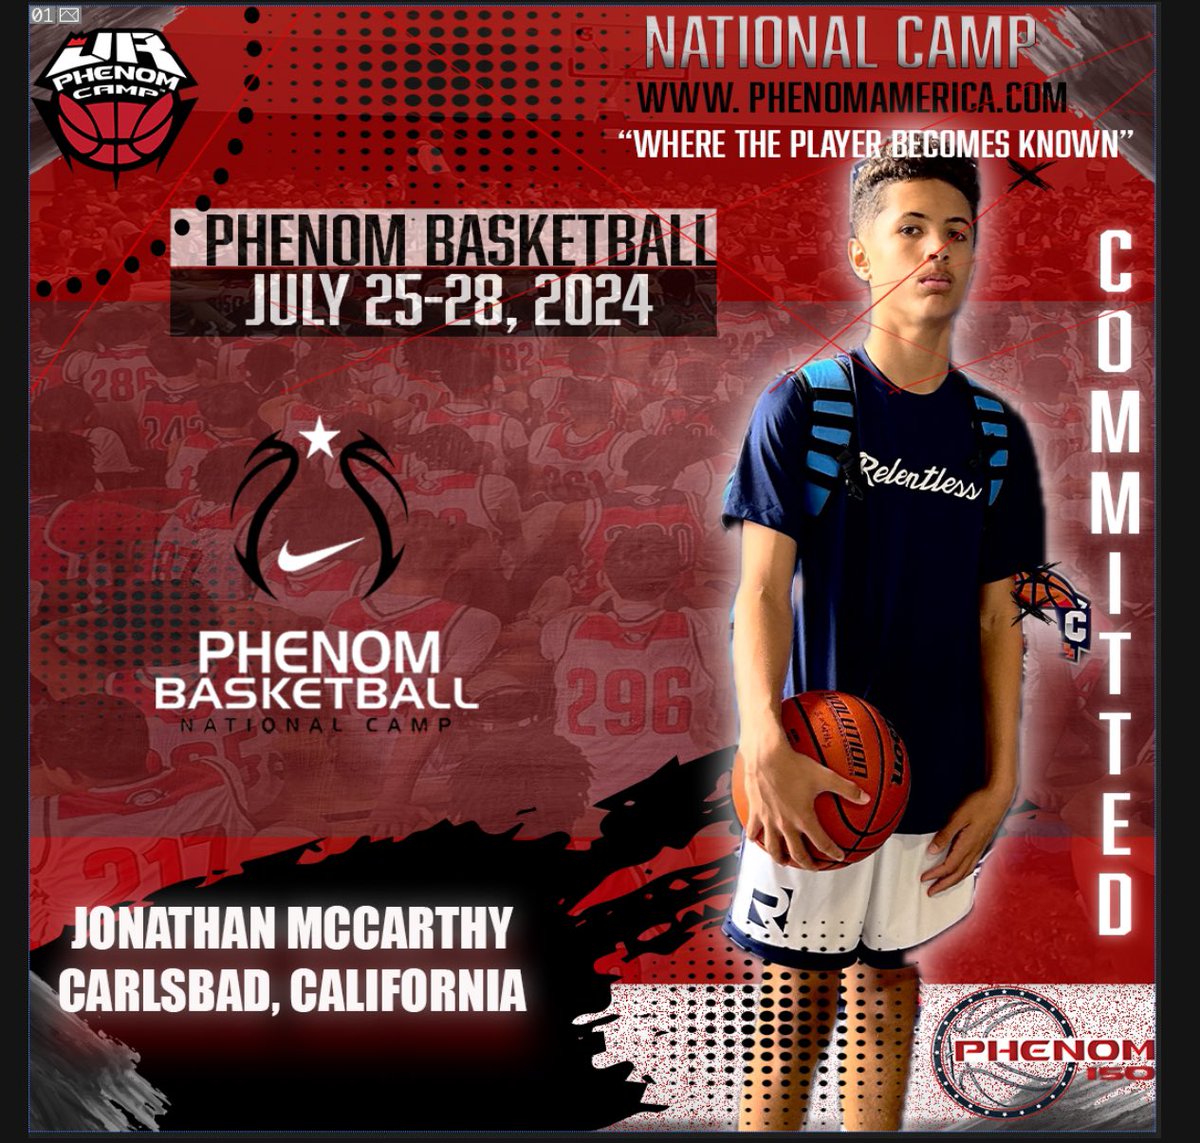 Phenom Basketball is excited to announce that Jonathan McCarthy from Carlsbad, California will be attending the 2024 Phenom National Camp in Orange County, California on July 25-28!
.
.
#wheretheplayerbecomesknown
#PhenomAmerica #PhenomNationalCamp #Phenom150 #jrphenomcamp